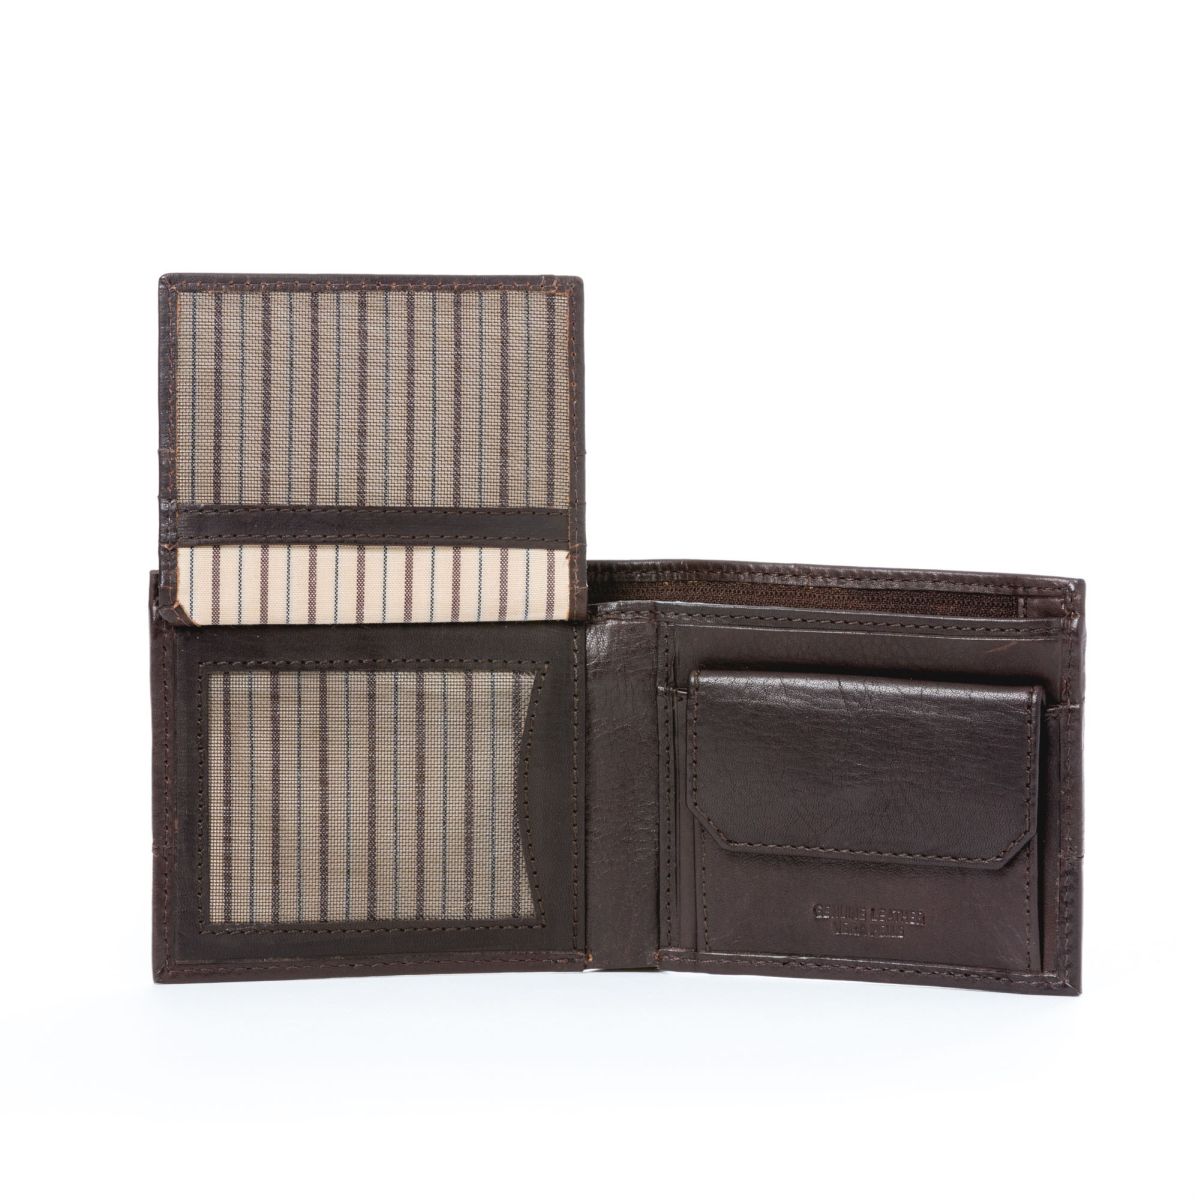 Men's Wallet with Coin Purse in Antiqued Vintage Leather Dudu